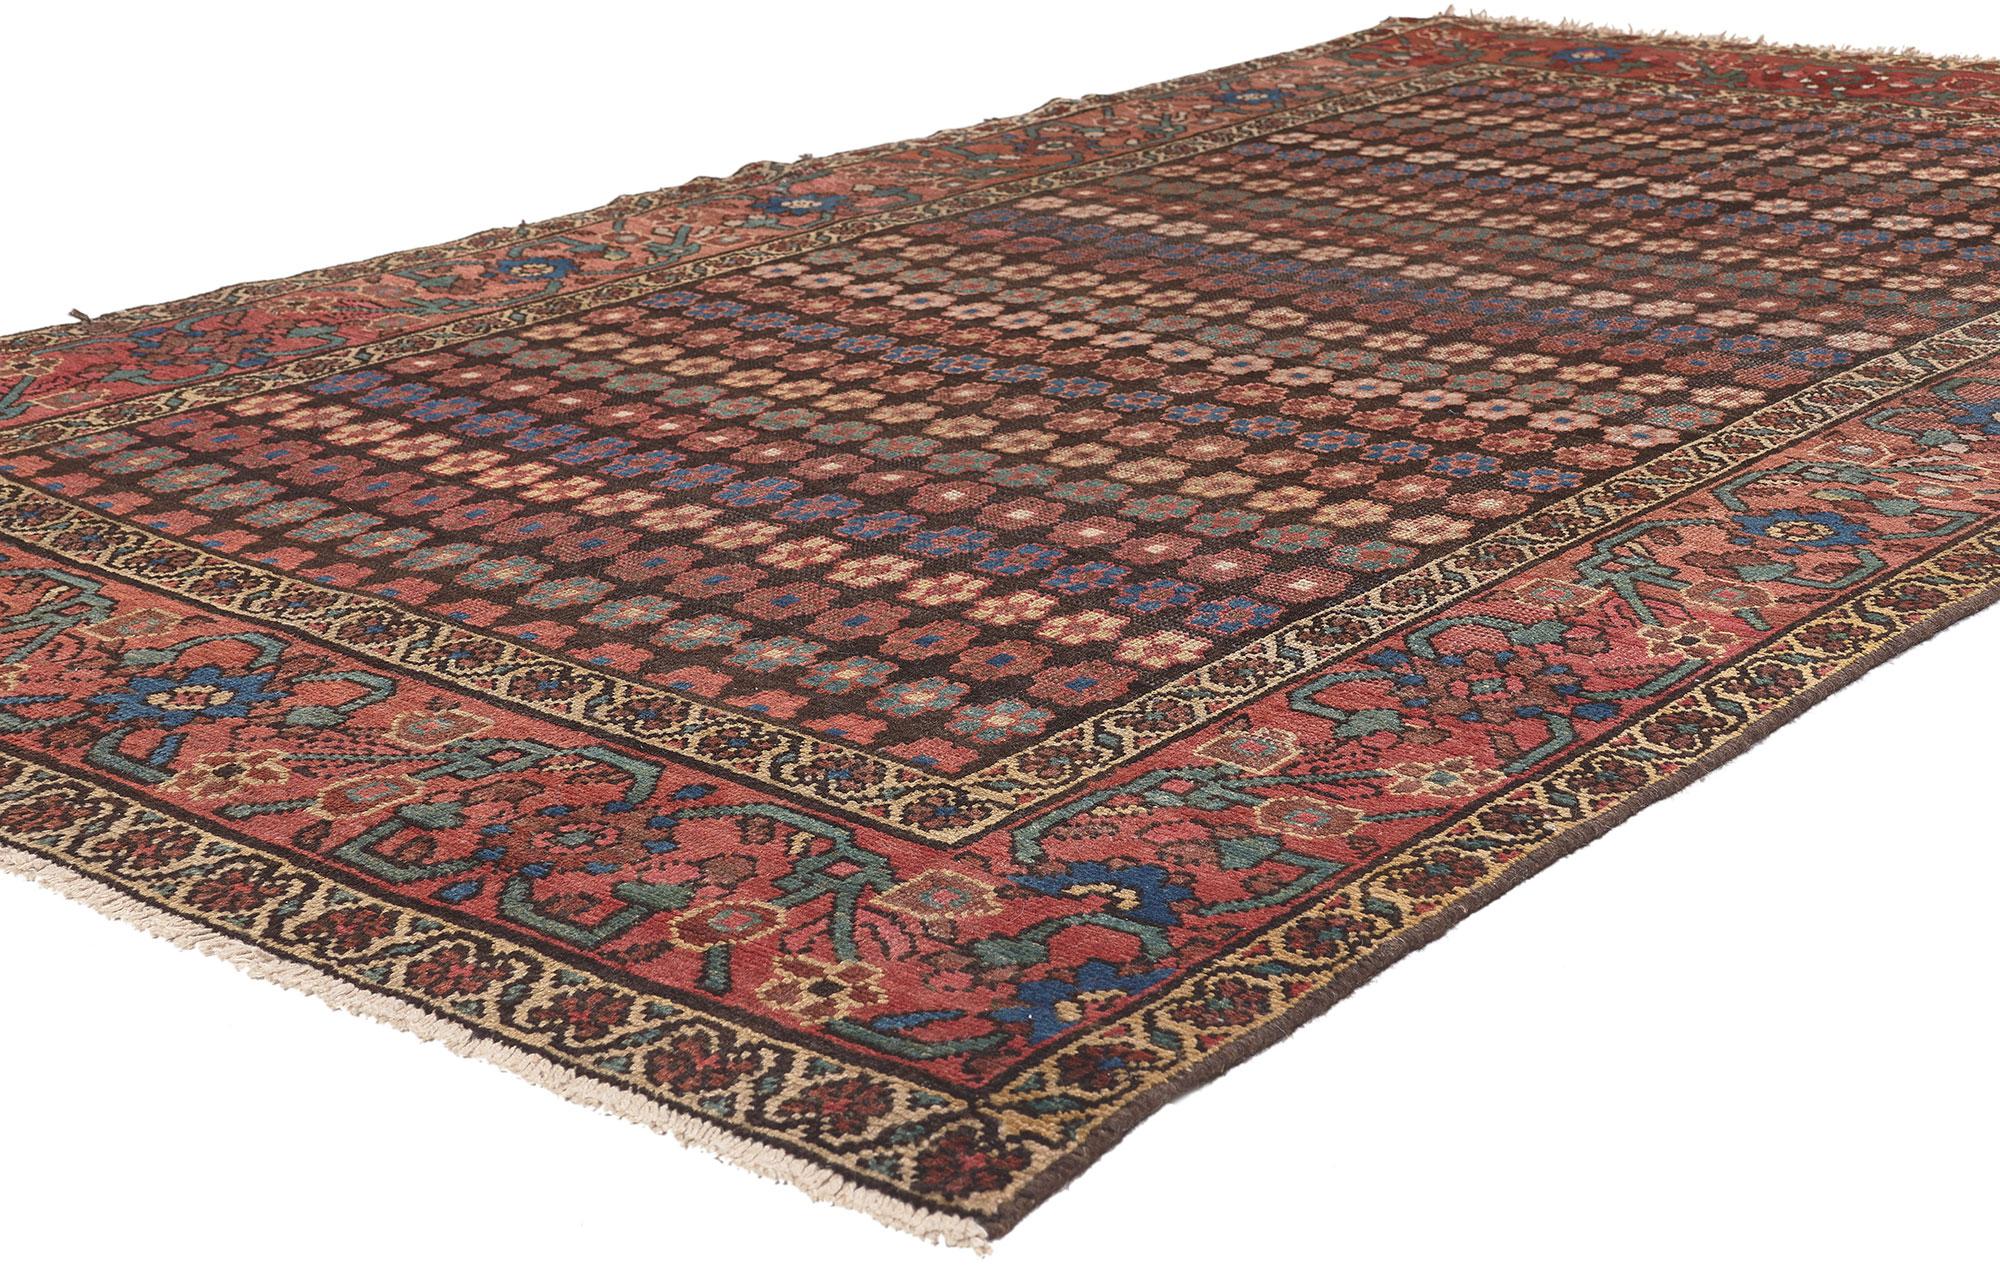 75253 Antique Persian Hamadan Rug, 04’10 x 08’09.
Earth-tone elegance meets flower power in this antique Persian Hamadan rug. The floral design and earthy hues woven into this piece work together creating a warm and inviting ambiance. An allover